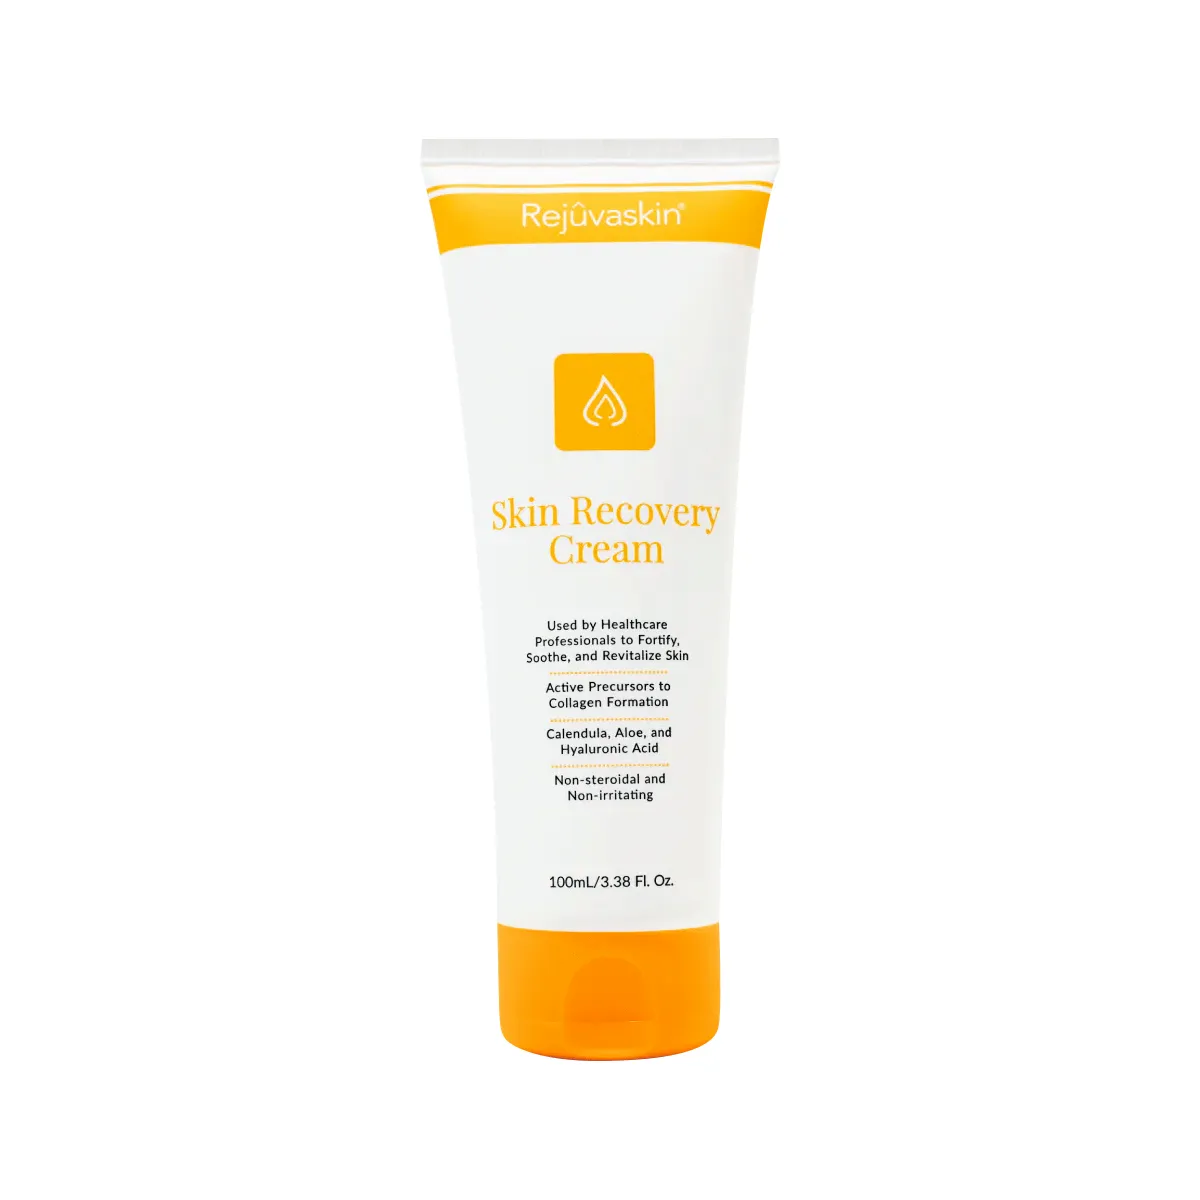 First product image of Rejuvaskin Skin Recovery Cream 100ml